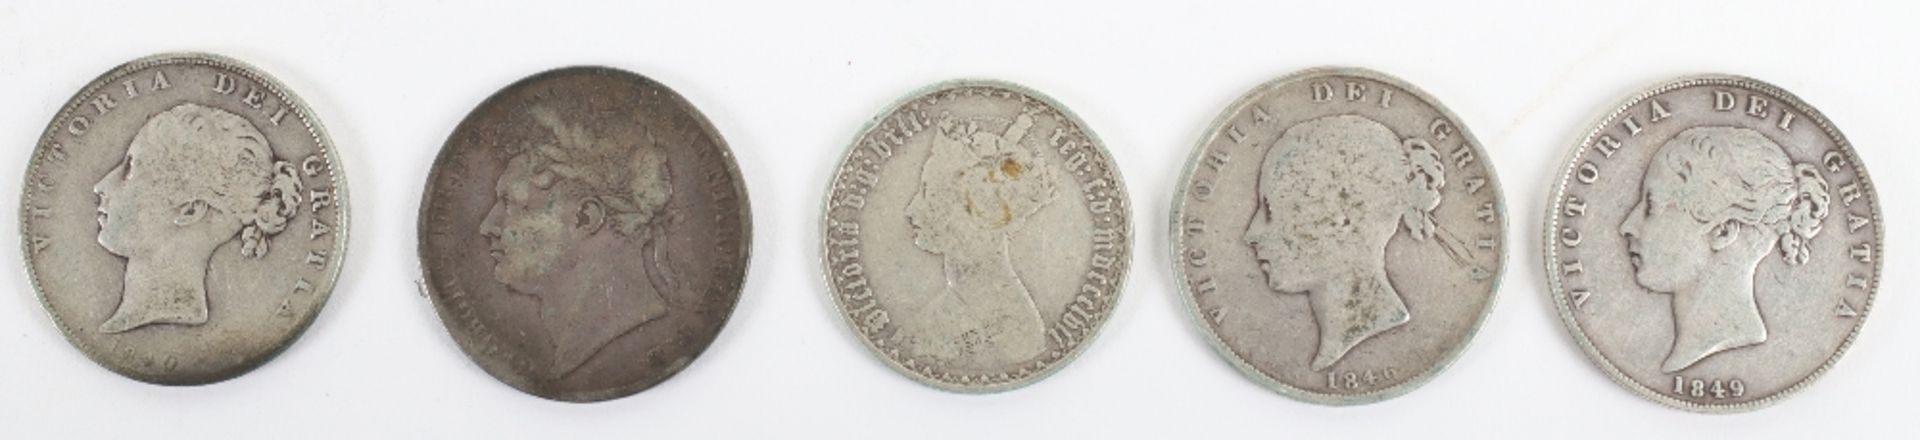 Selection of halfcrowns, 1823, 1846, 1840, 1849